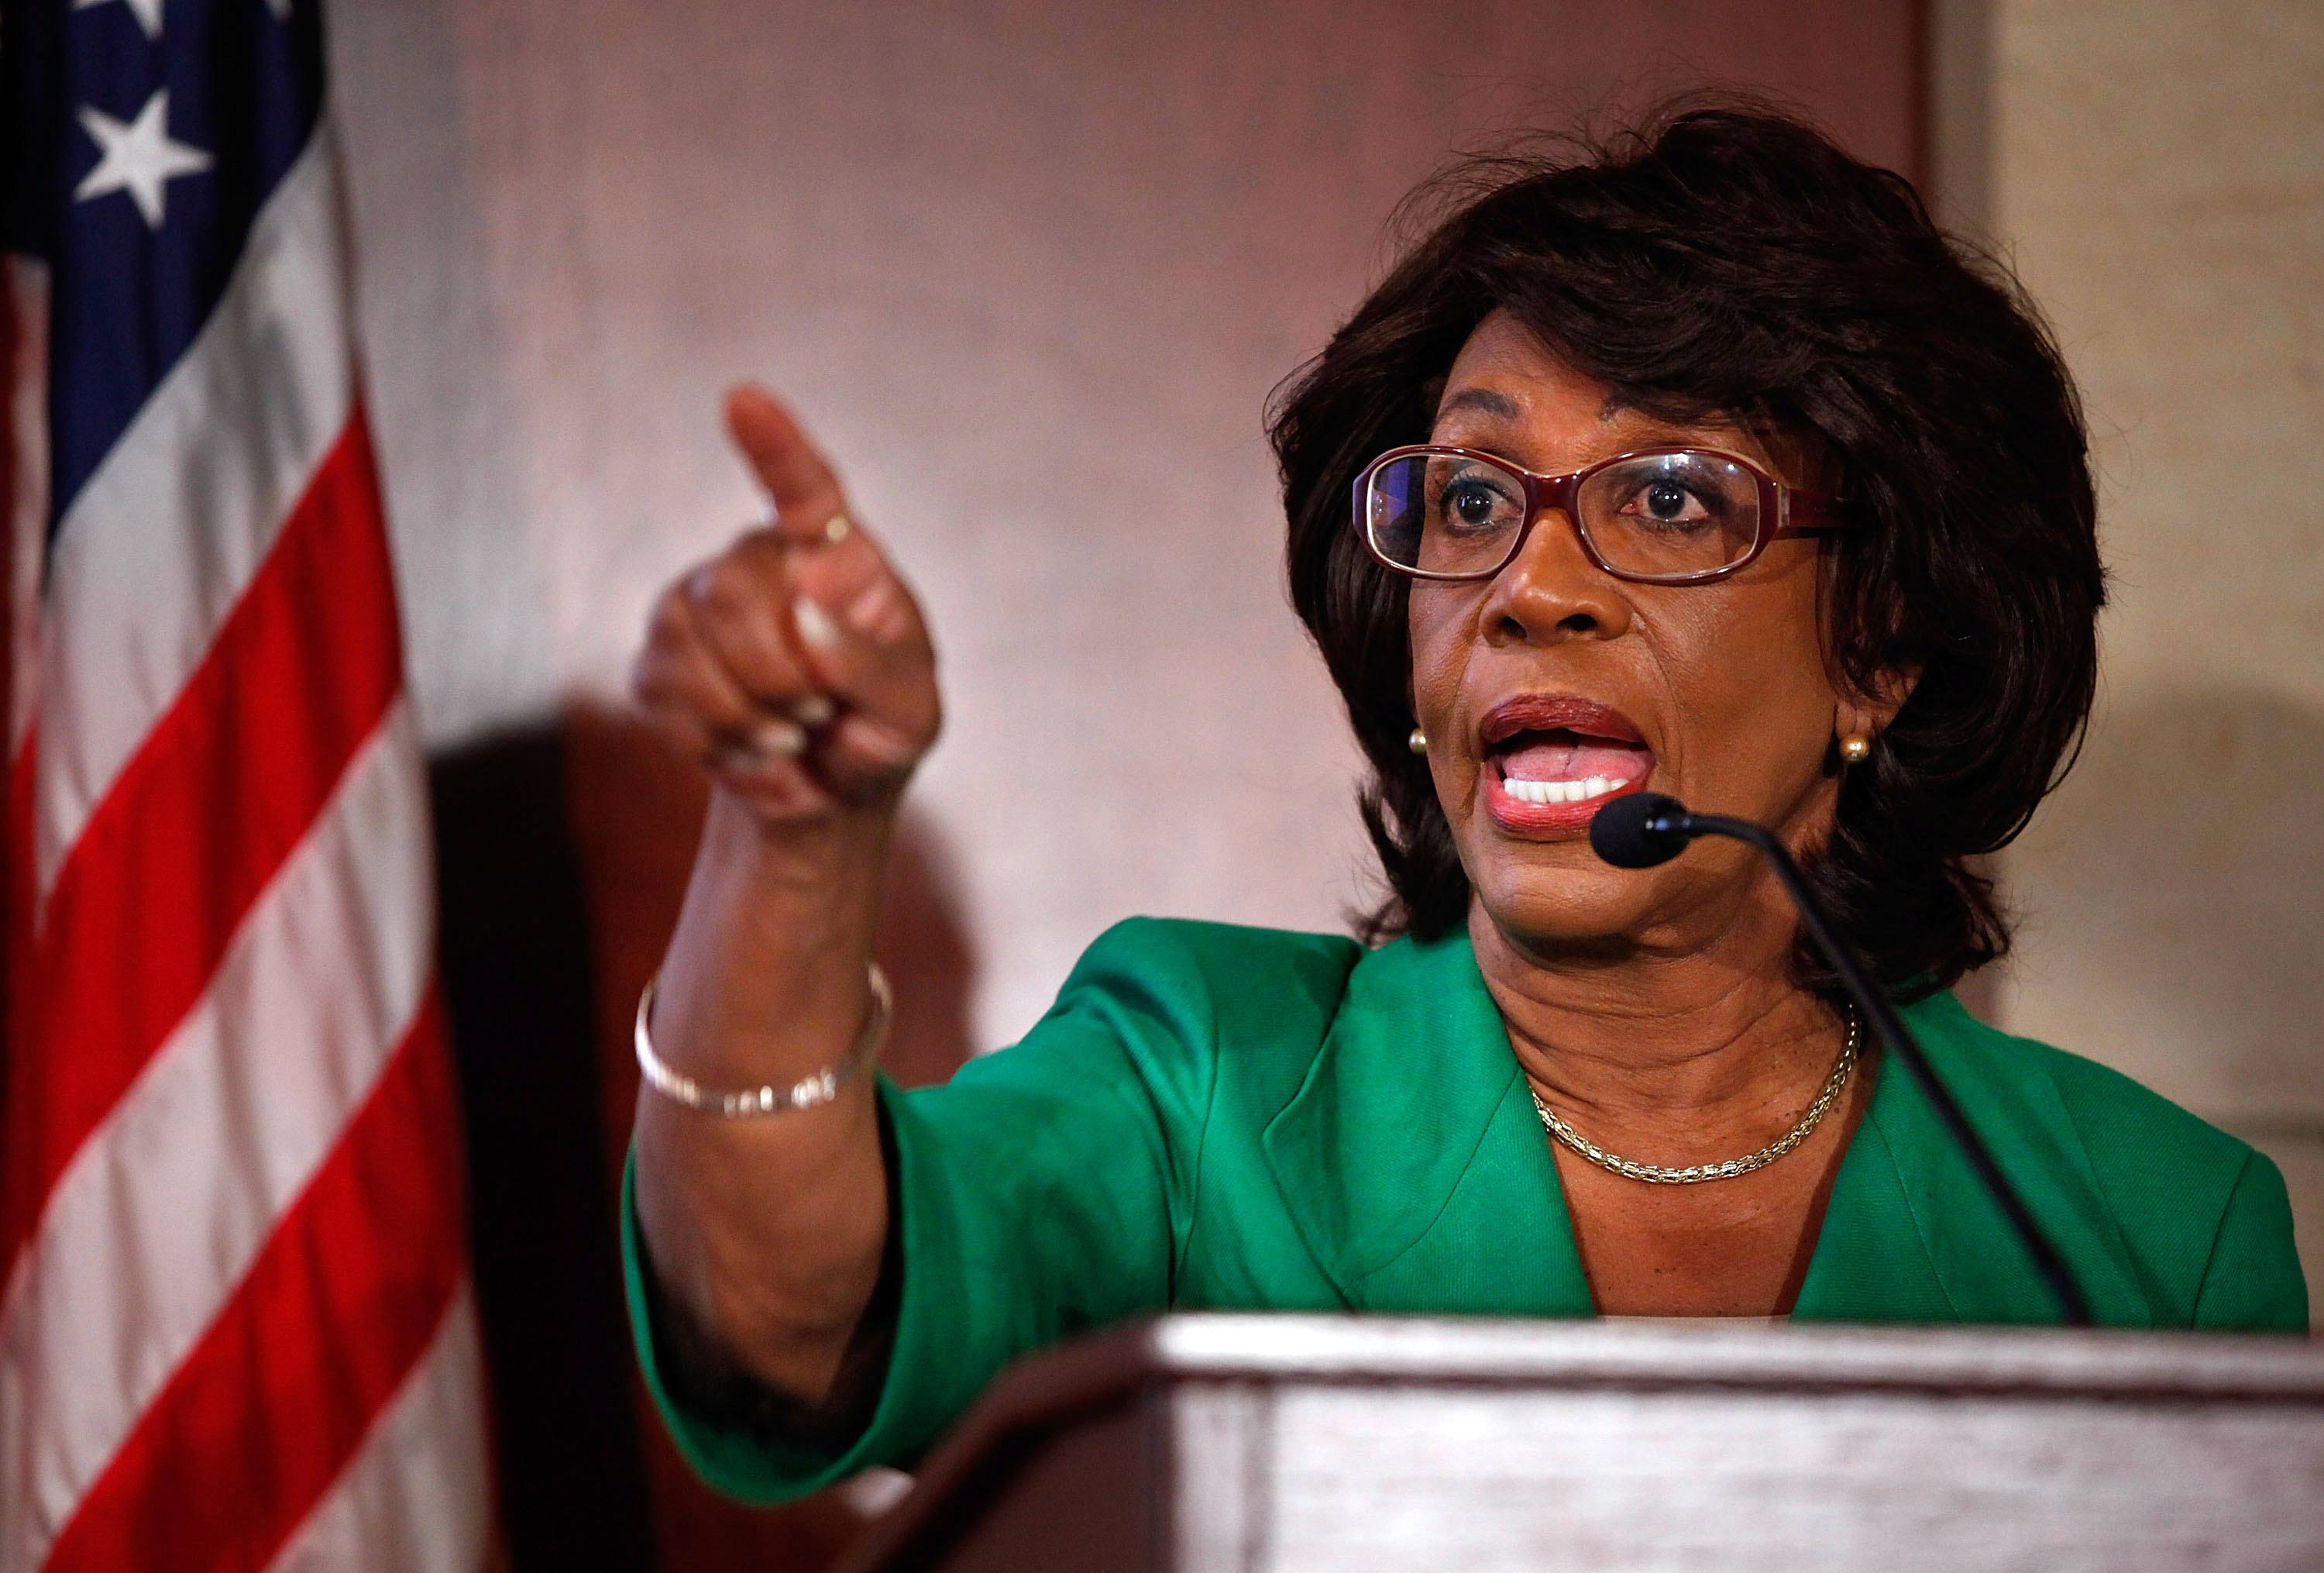 Maxine Waters speaking at a press conference